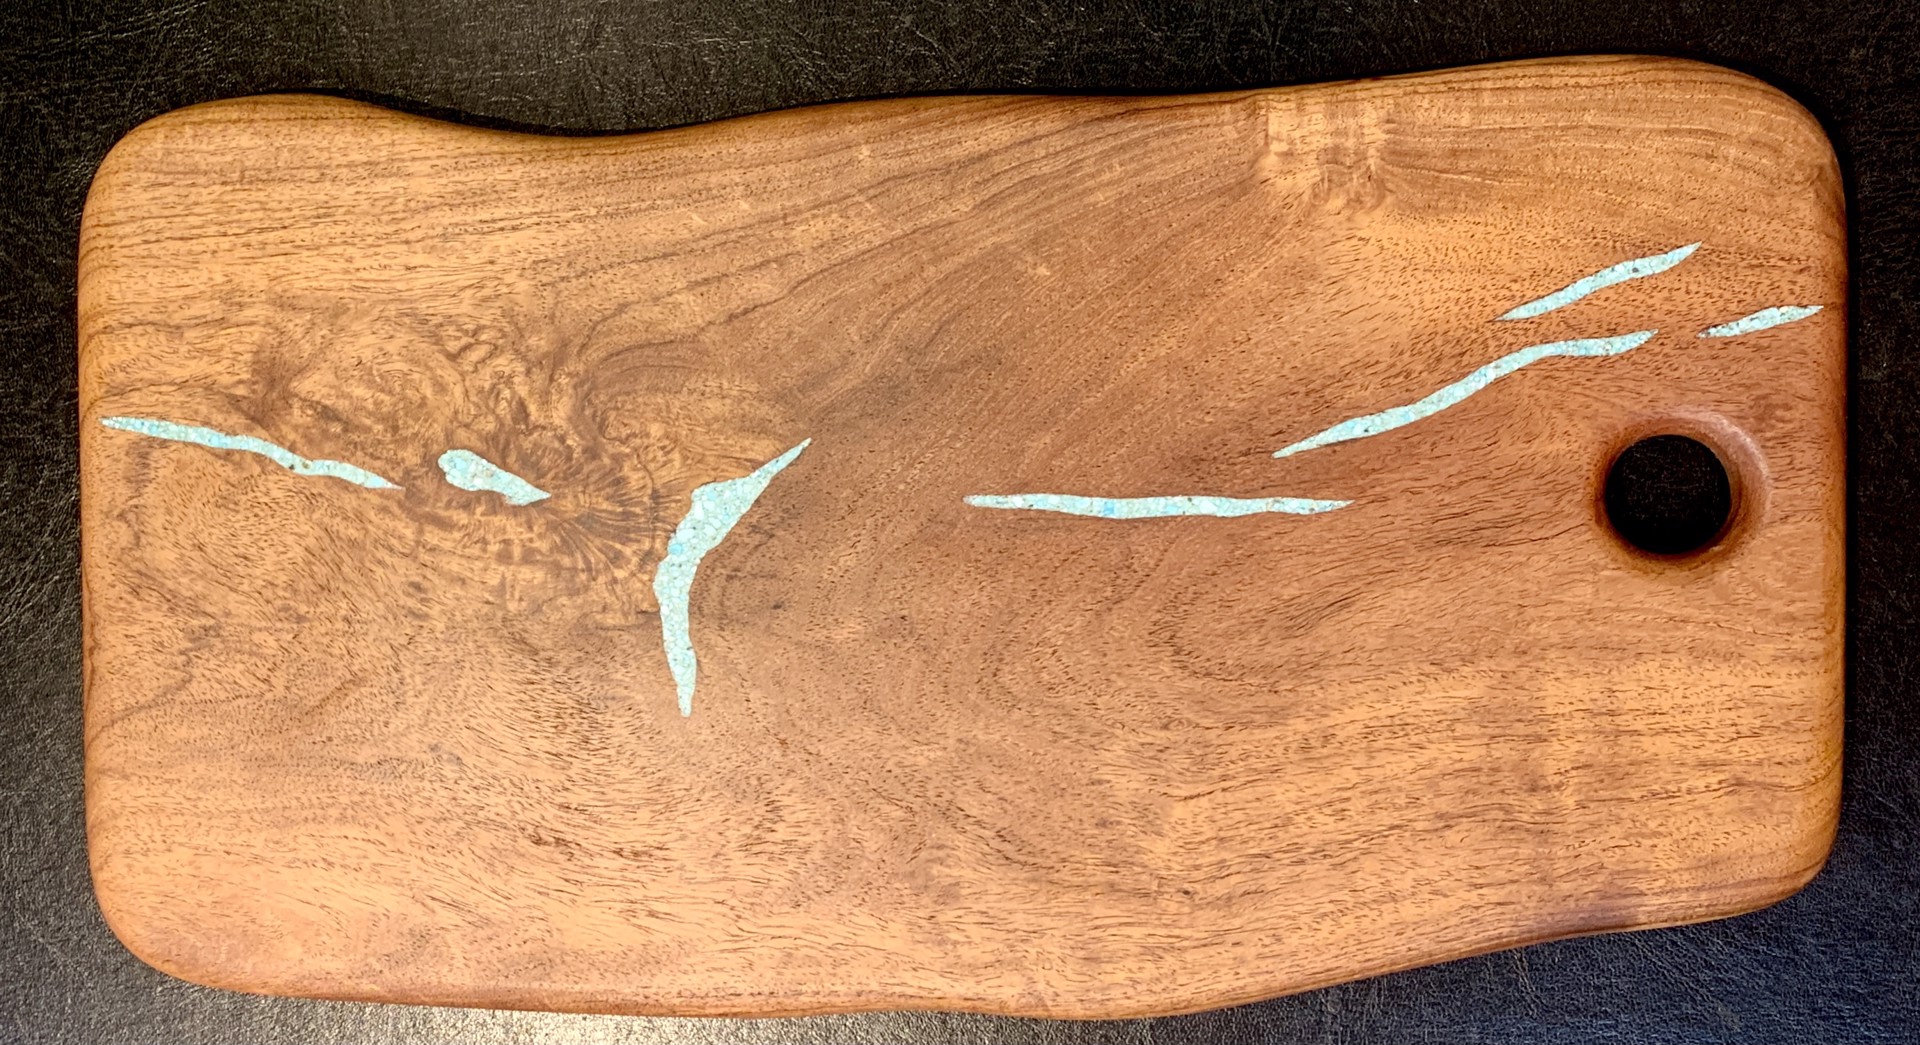 Cutting Board - Mesquite With Turquoise Inlay by TreeStump Woodcraft